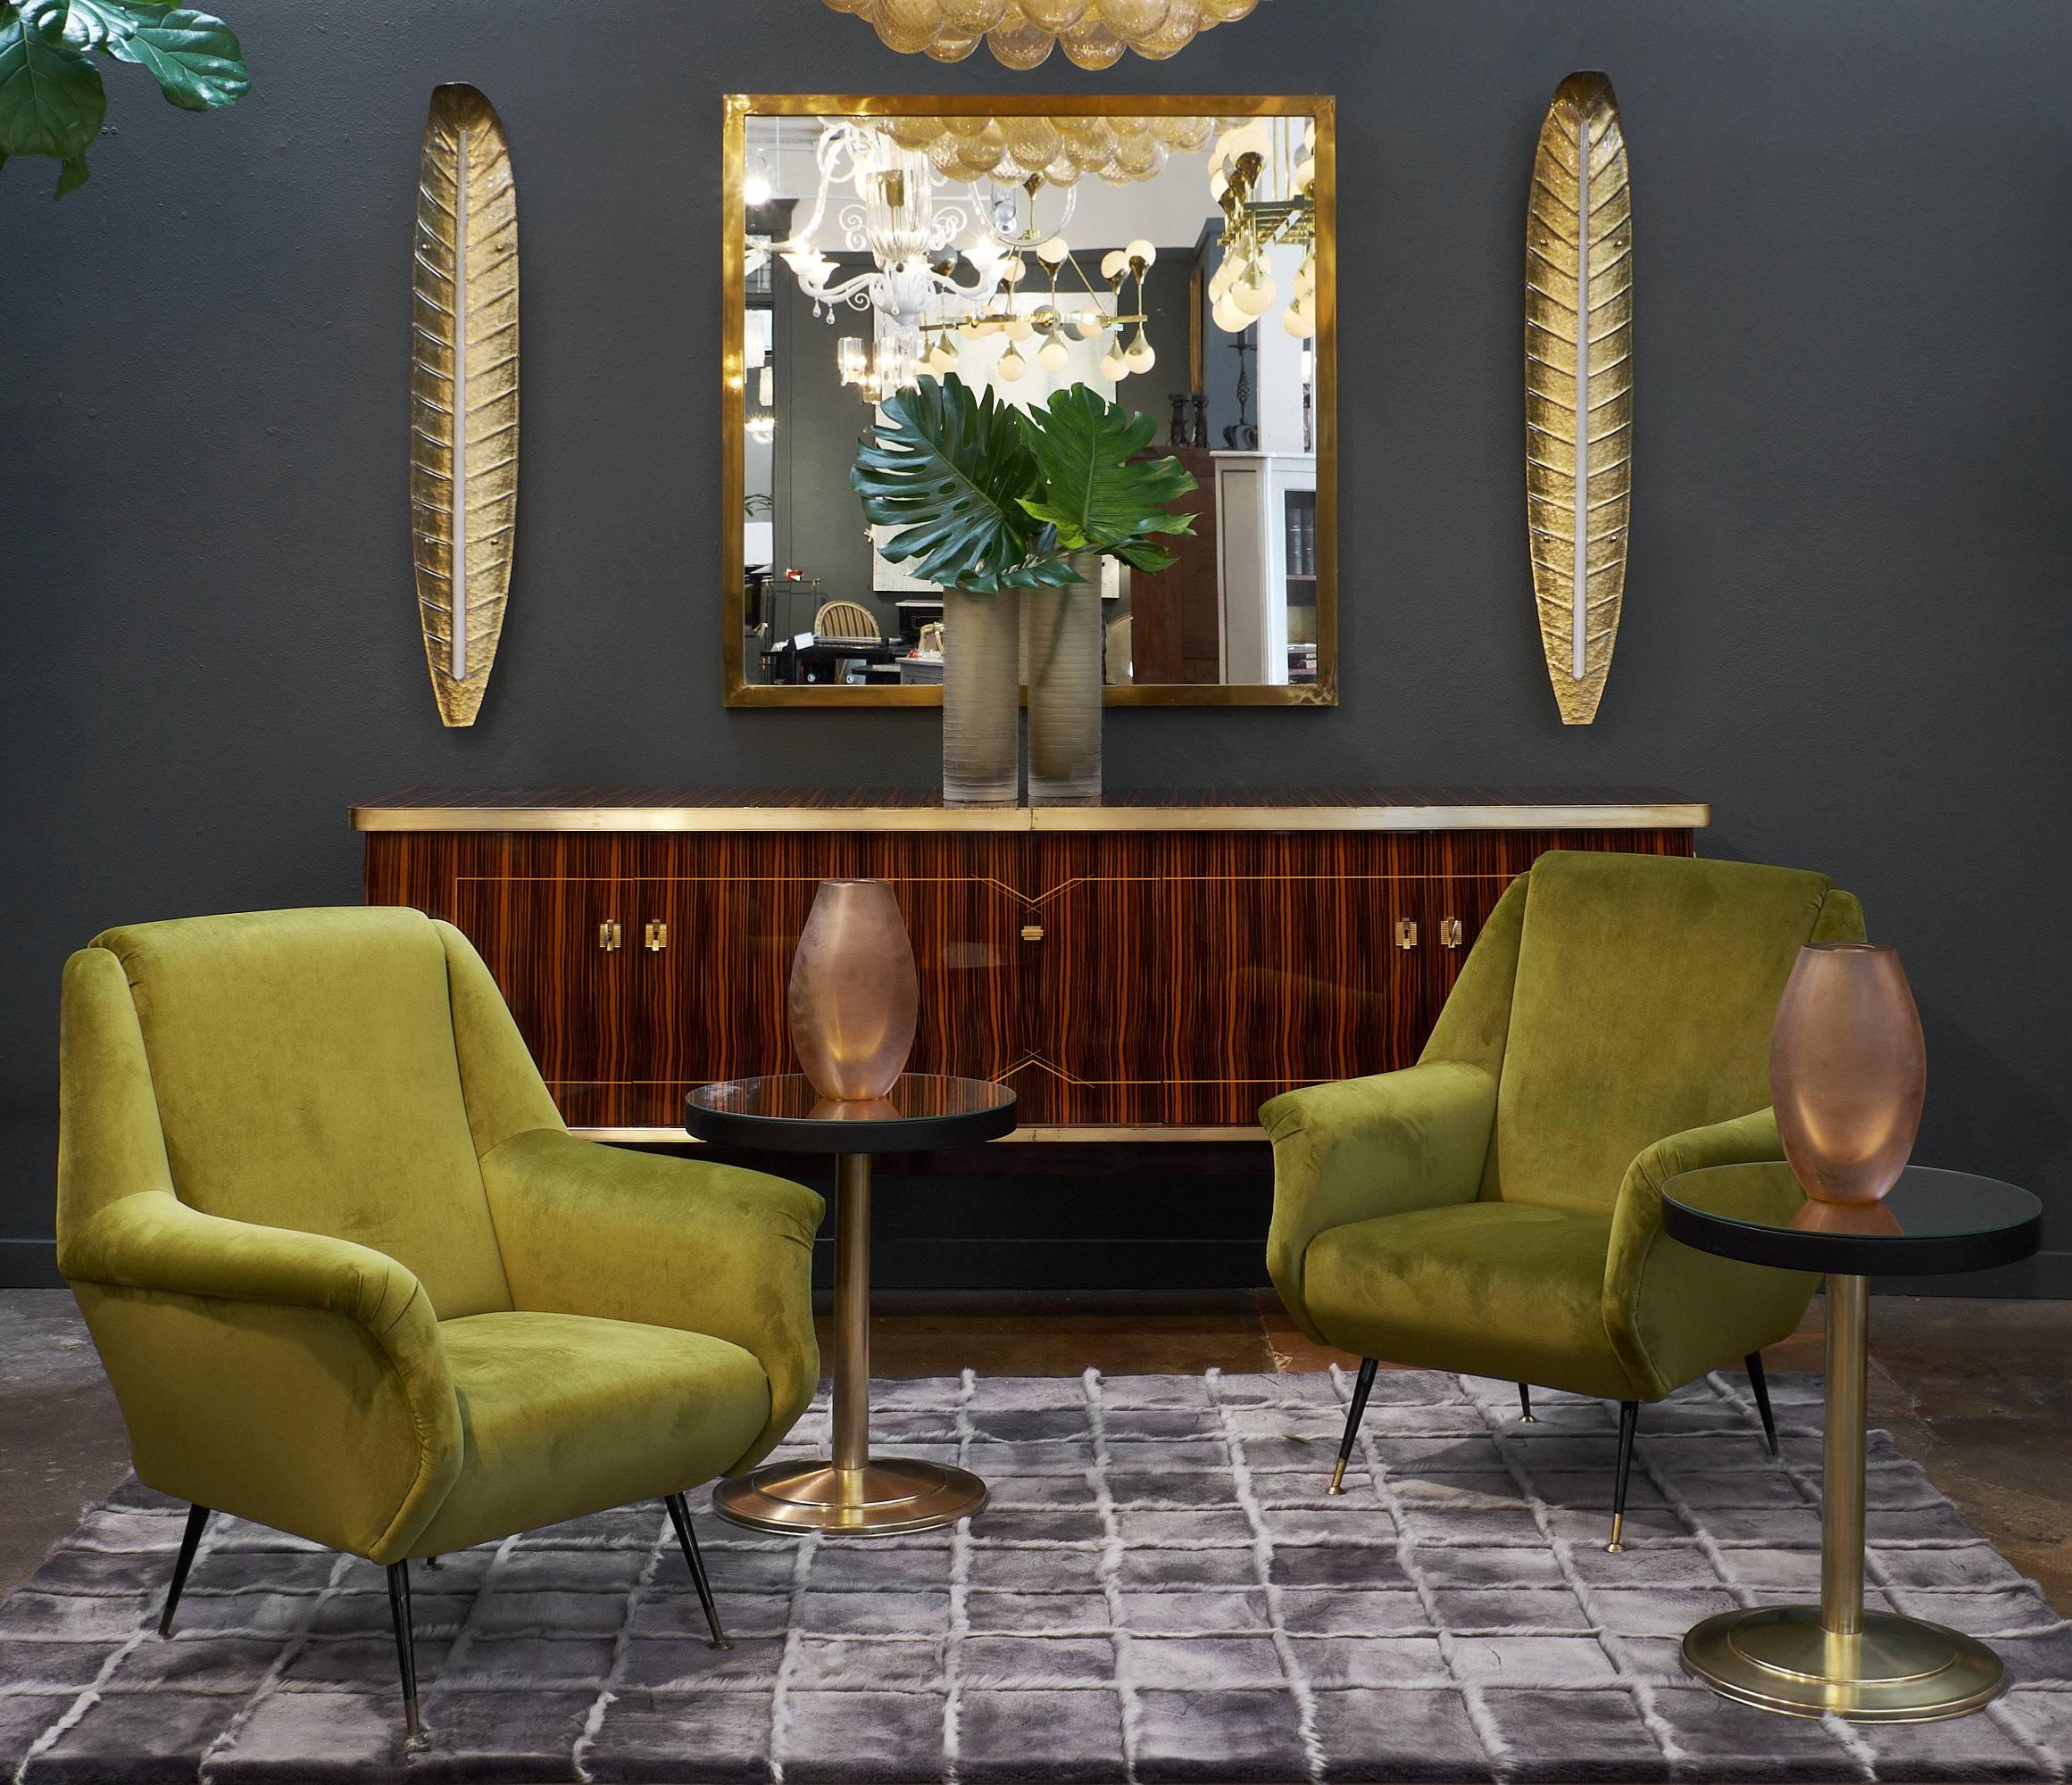 Pair of Marco Zanuso style armchairs from the midcentury upholstered in the original green velvet. This Italian pair has the geometric shape and arms typical of the Zanuso style. The four tapered legs are each capped with brass. These fantastic